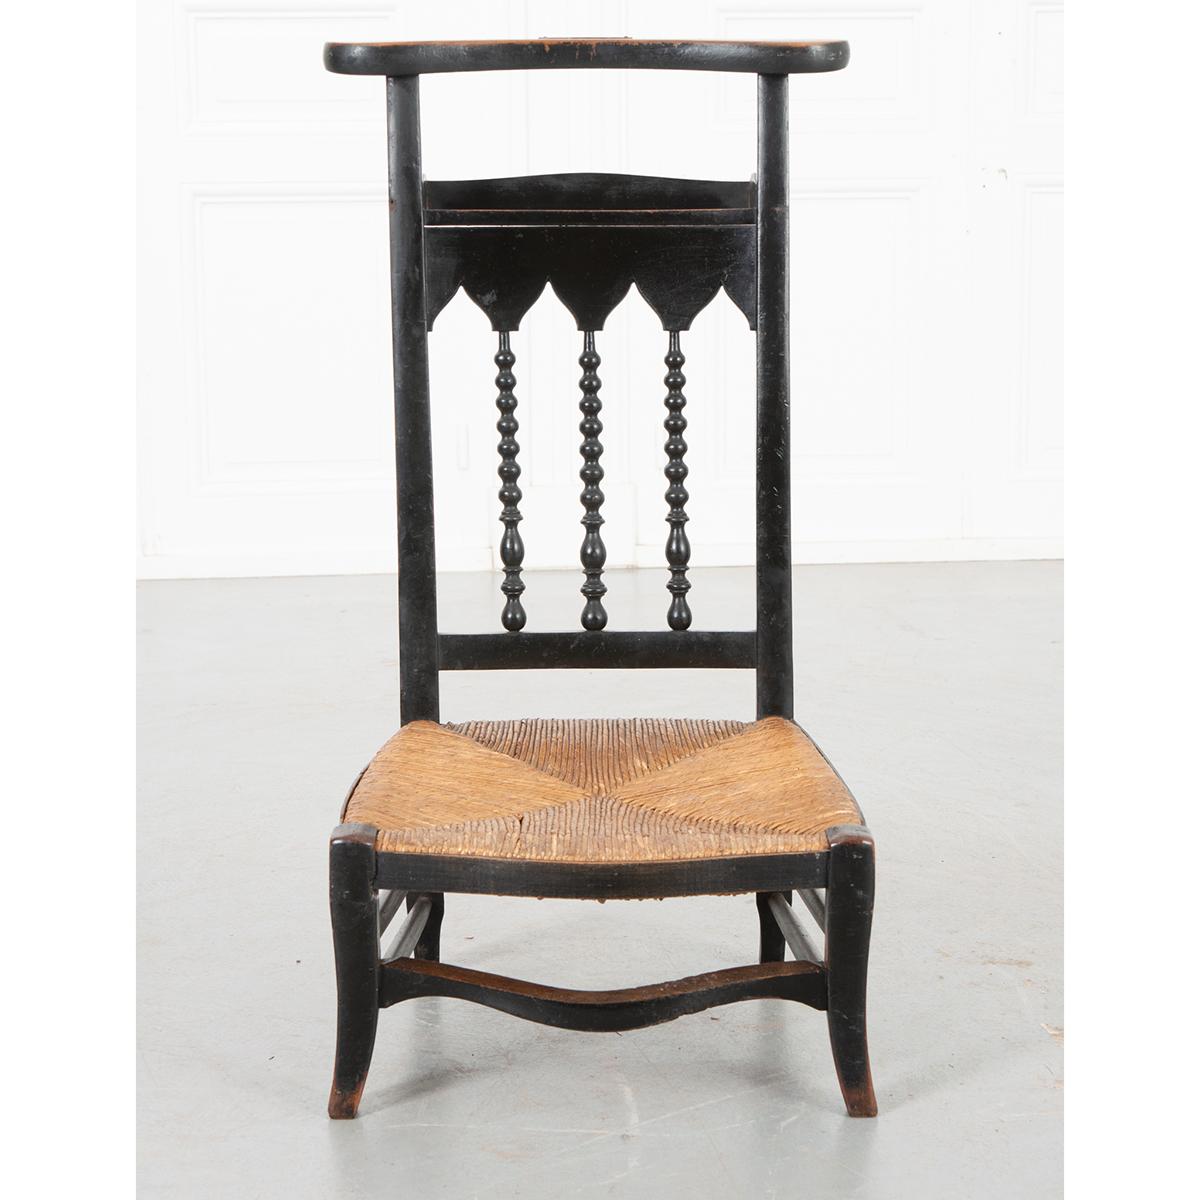 This is a French 19th century rush seat prie dieu. It has a painted wood finish with turned wood spindles on the back and also a shelf. It has a shaped wood top where your arms would have rested for praying. A brass plaque rests on top with the name